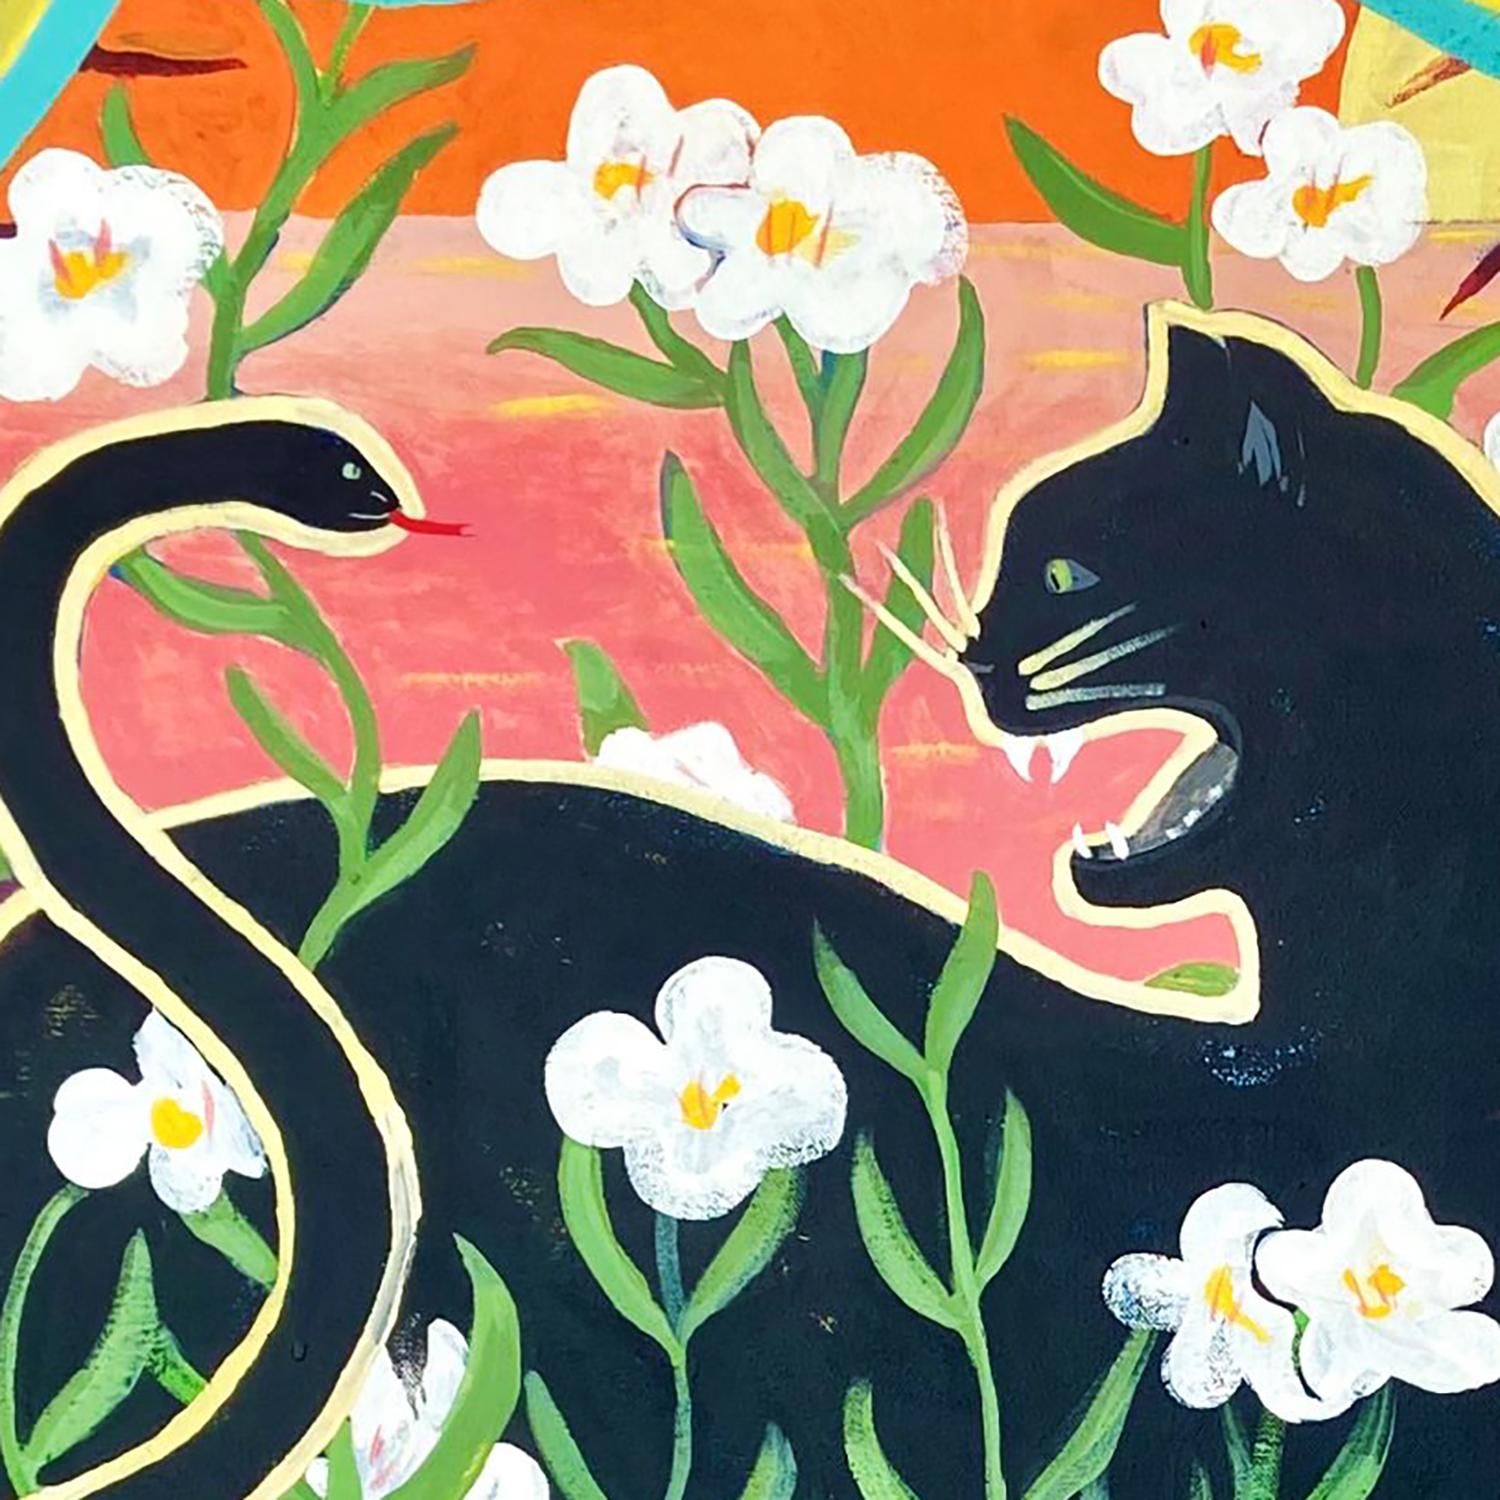 'Ego' - floral - sun - fauvism - colorful - black cat - Greek mythology - snakes - Painting by Shelby Little